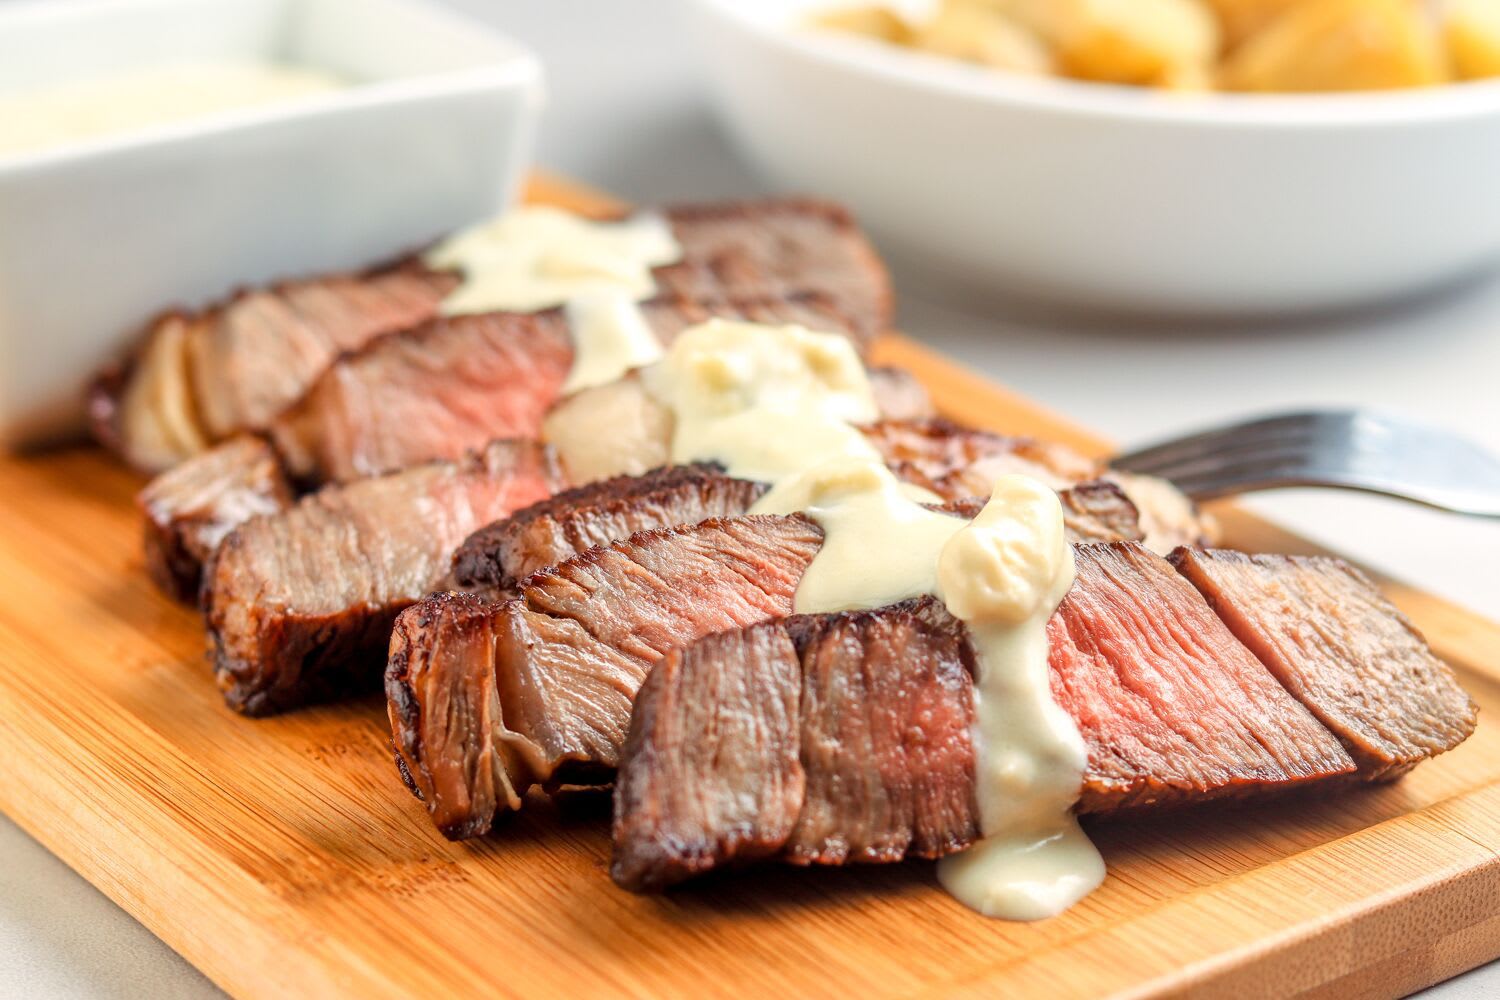 How to Make Blue Cheese Sauce for Steak